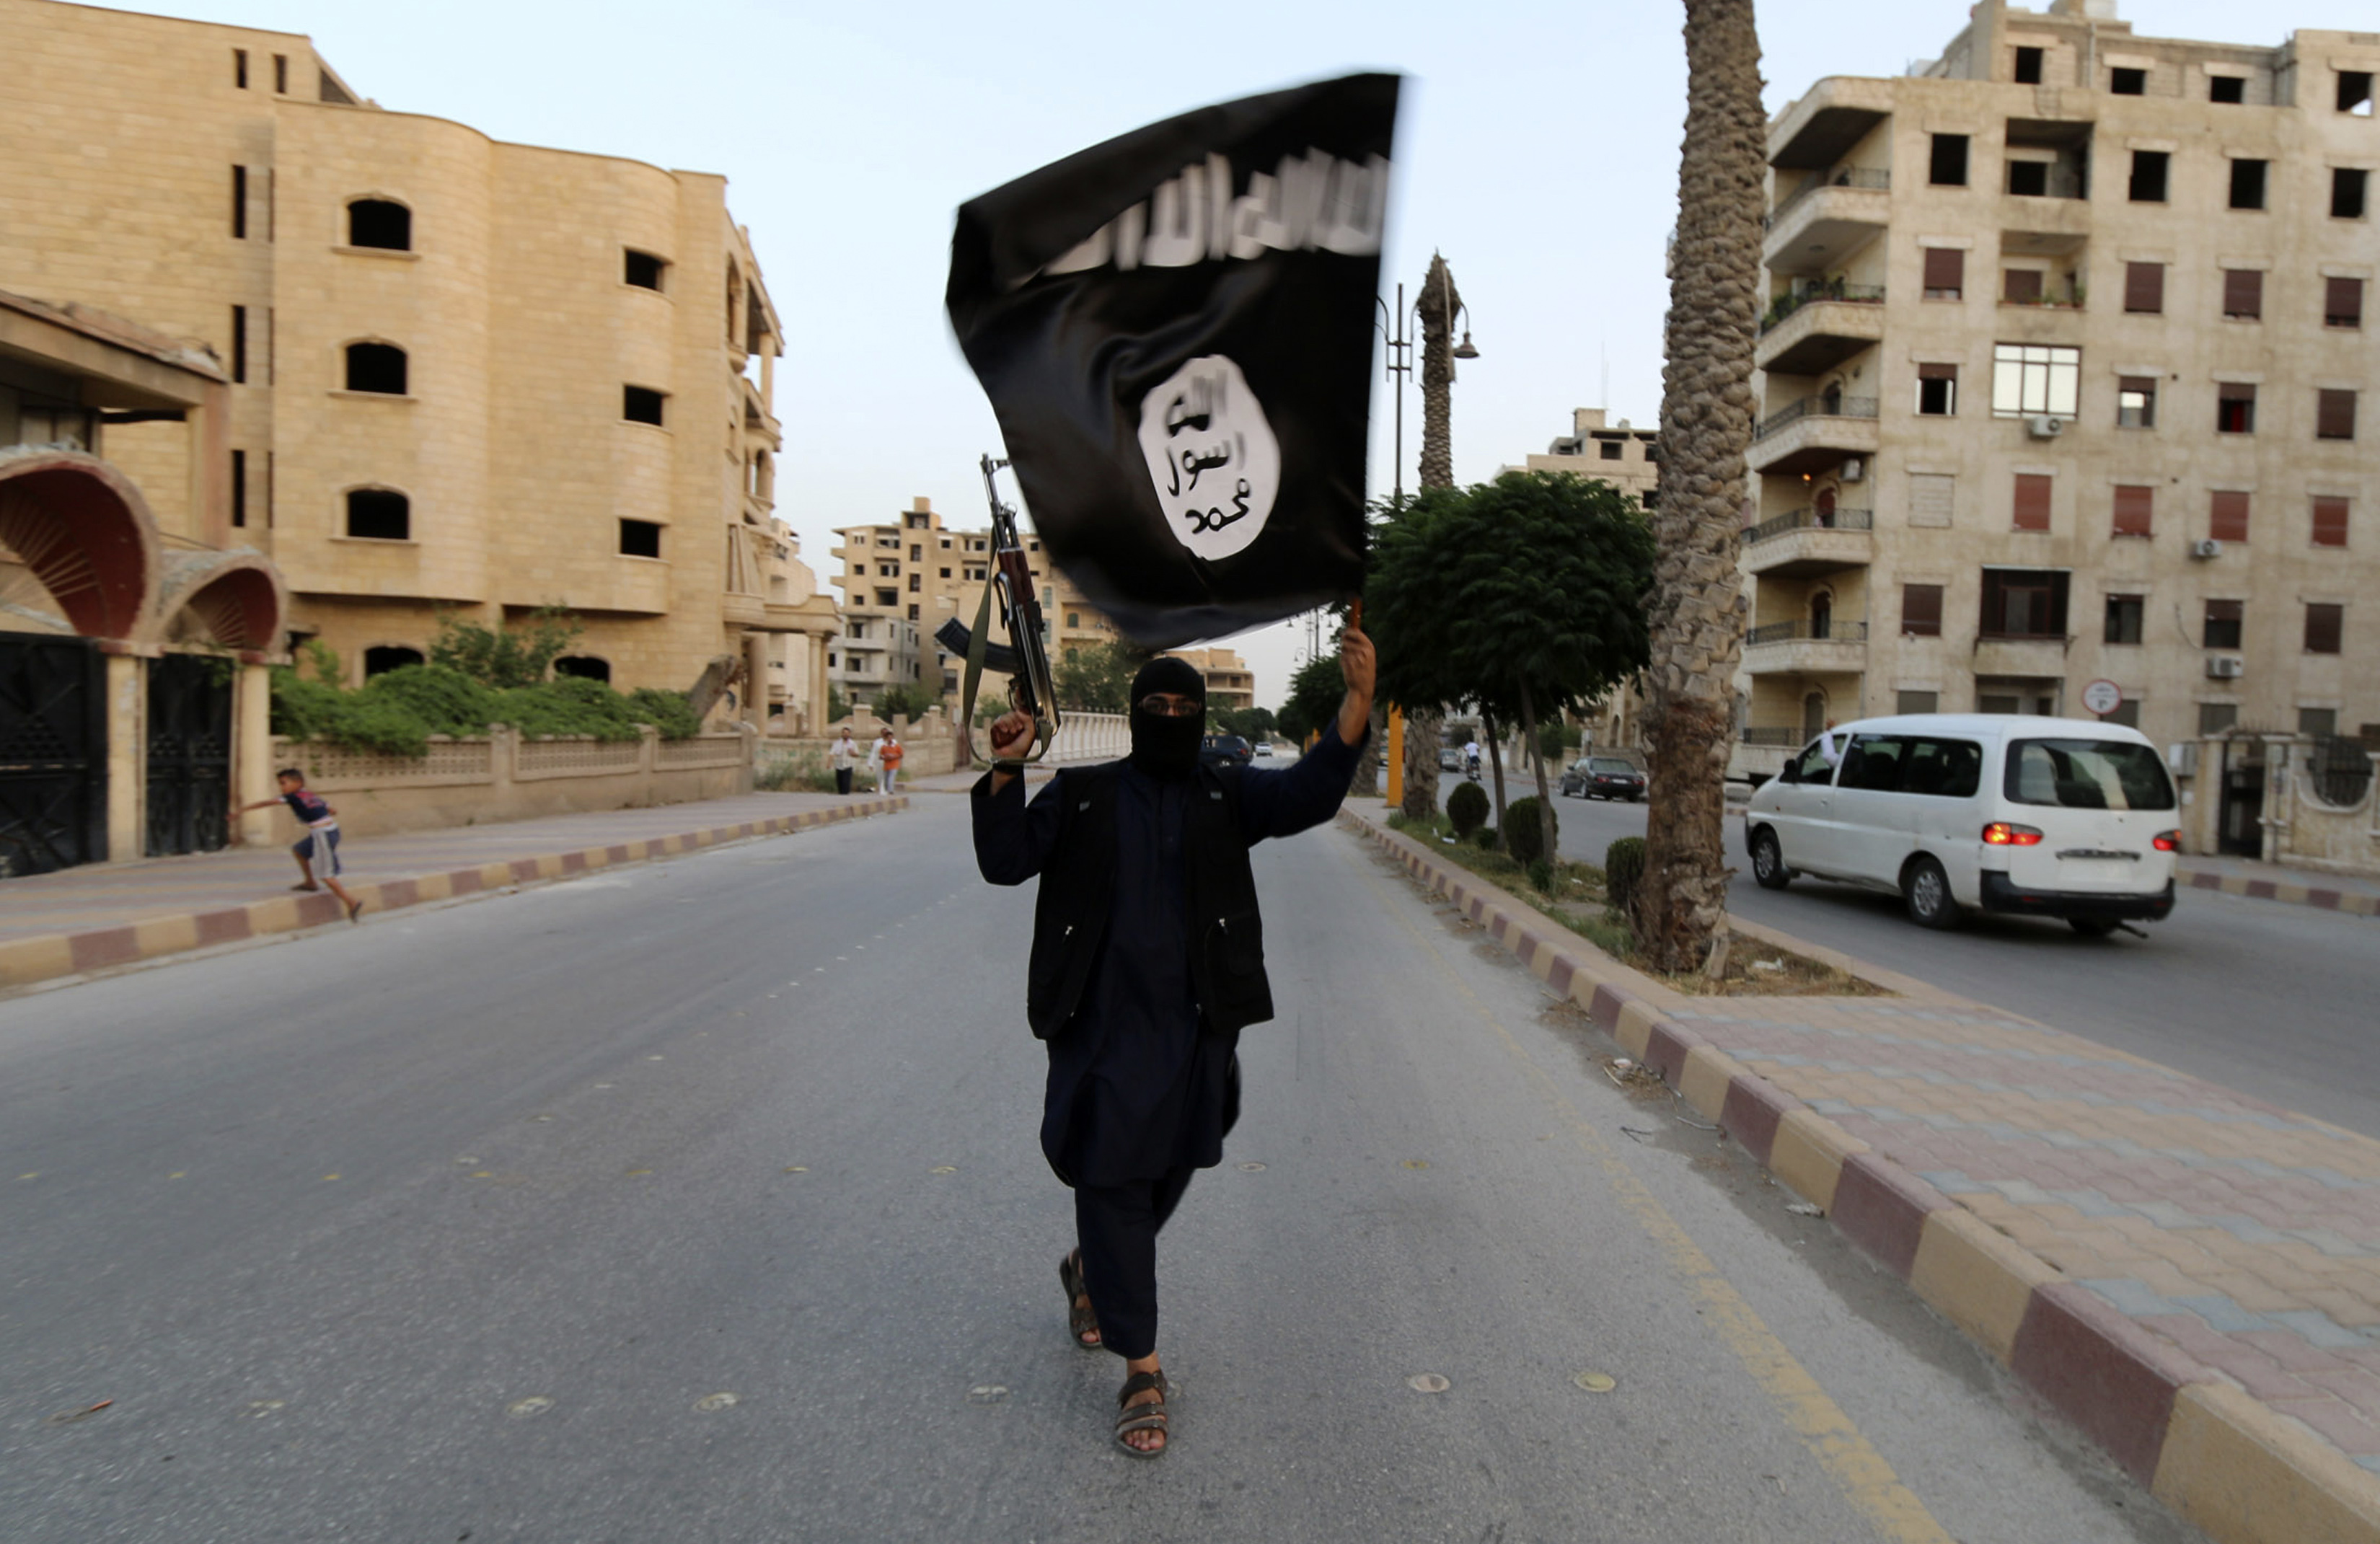 A member loyal to ISIS waves their flag in Raqqa, Syria, on June 29, 2014 (Reuters)